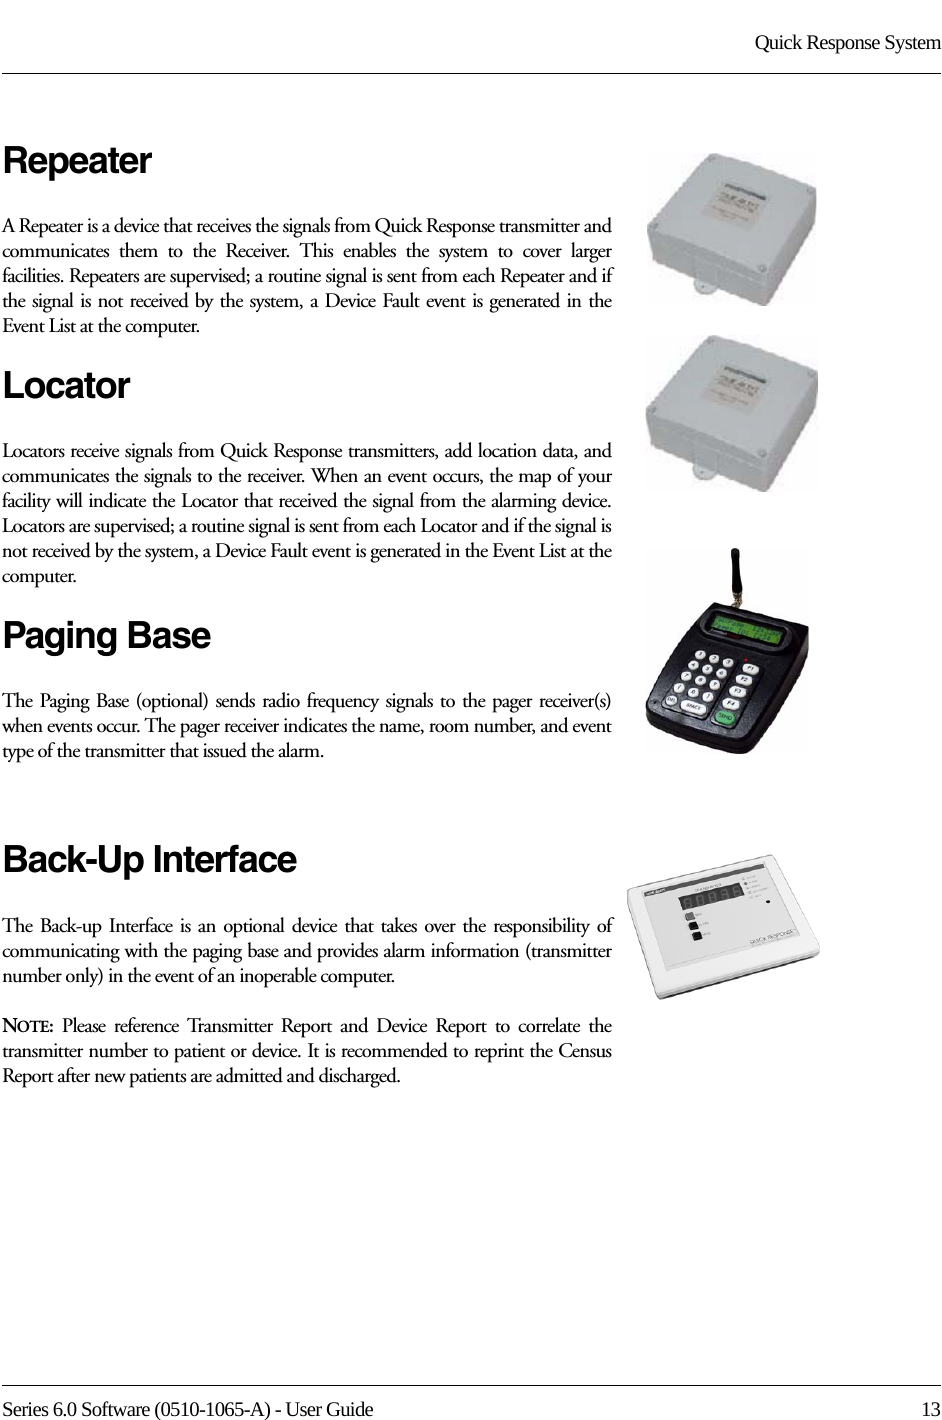 Series 6.0 Software (0510-1065-A) - User Guide  13Quick Response SystemRepeaterA Repeater is a device that receives the signals from Quick Response transmitter and communicates them to the Receiver. This enables the system to cover larger facilities. Repeaters are supervised; a routine signal is sent from each Repeater and if the signal is not received by the system, a Device Fault event is generated in the Event List at the computer.LocatorLocators receive signals from Quick Response transmitters, add location data, and communicates the signals to the receiver. When an event occurs, the map of your facility will indicate the Locator that received the signal from the alarming device. Locators are supervised; a routine signal is sent from each Locator and if the signal is not received by the system, a Device Fault event is generated in the Event List at the computer.Paging BaseThe Paging Base (optional) sends radio frequency signals to the pager receiver(s) when events occur. The pager receiver indicates the name, room number, and event type of the transmitter that issued the alarm.Back-Up InterfaceThe Back-up Interface is an optional device that takes over the responsibility of communicating with the paging base and provides alarm information (transmitter number only) in the event of an inoperable computer.NOTE:  Please reference Transmitter Report and Device Report to correlate the transmitter number to patient or device. It is recommended to reprint the Census Report after new patients are admitted and discharged.